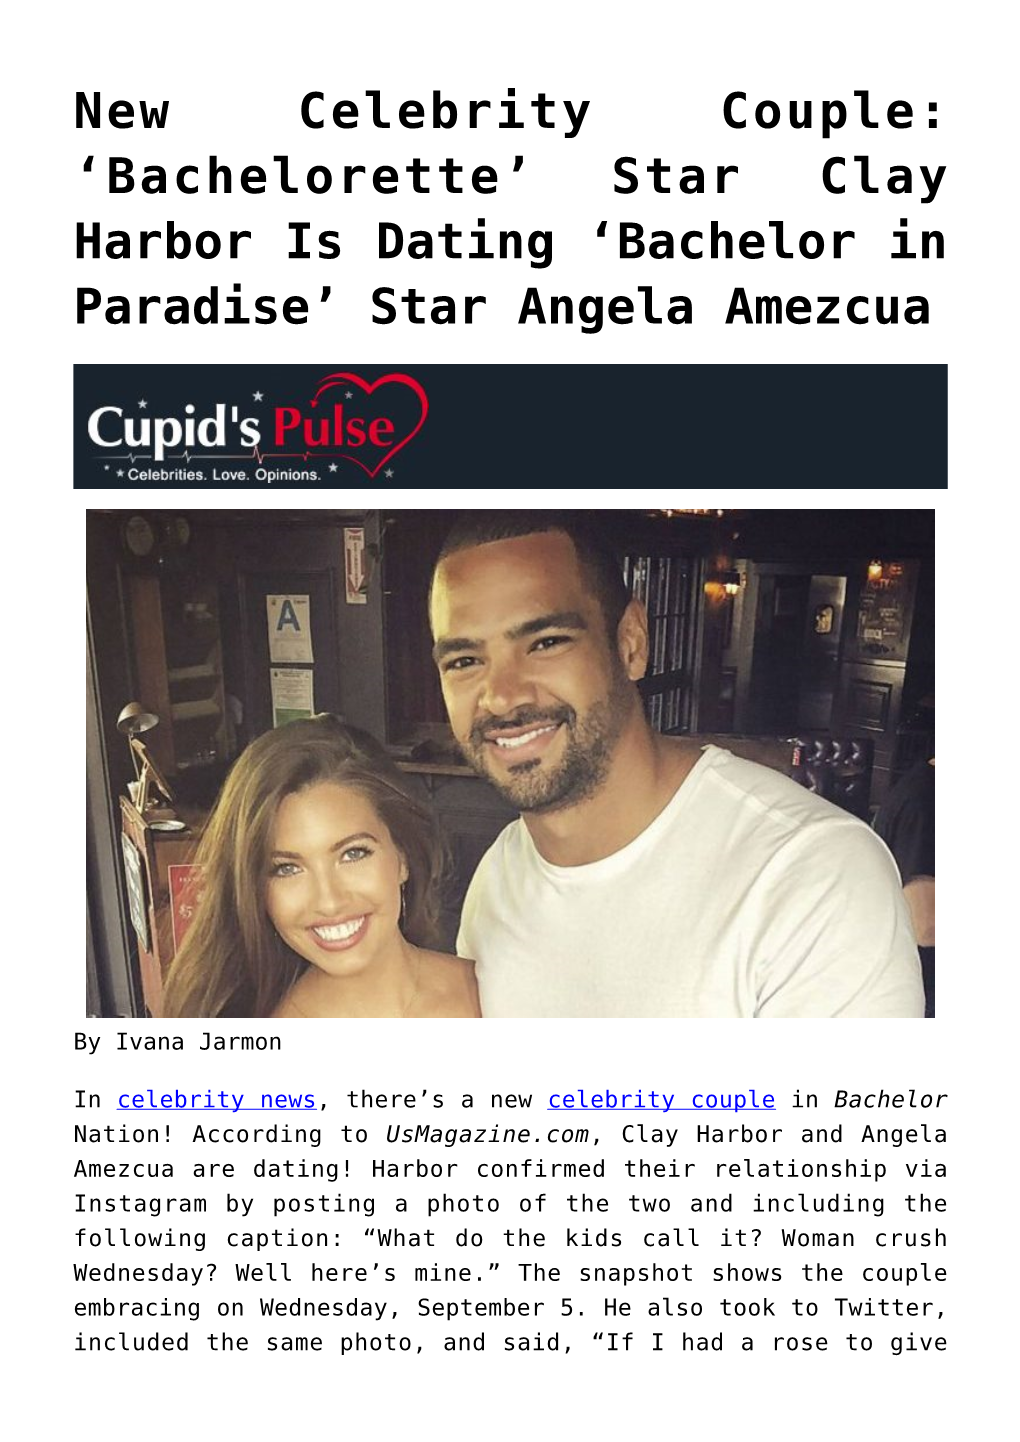 New Celebrity Couple: ‘Bachelorette’ Star Clay Harbor Is Dating ‘Bachelor in Paradise’ Star Angela Amezcua